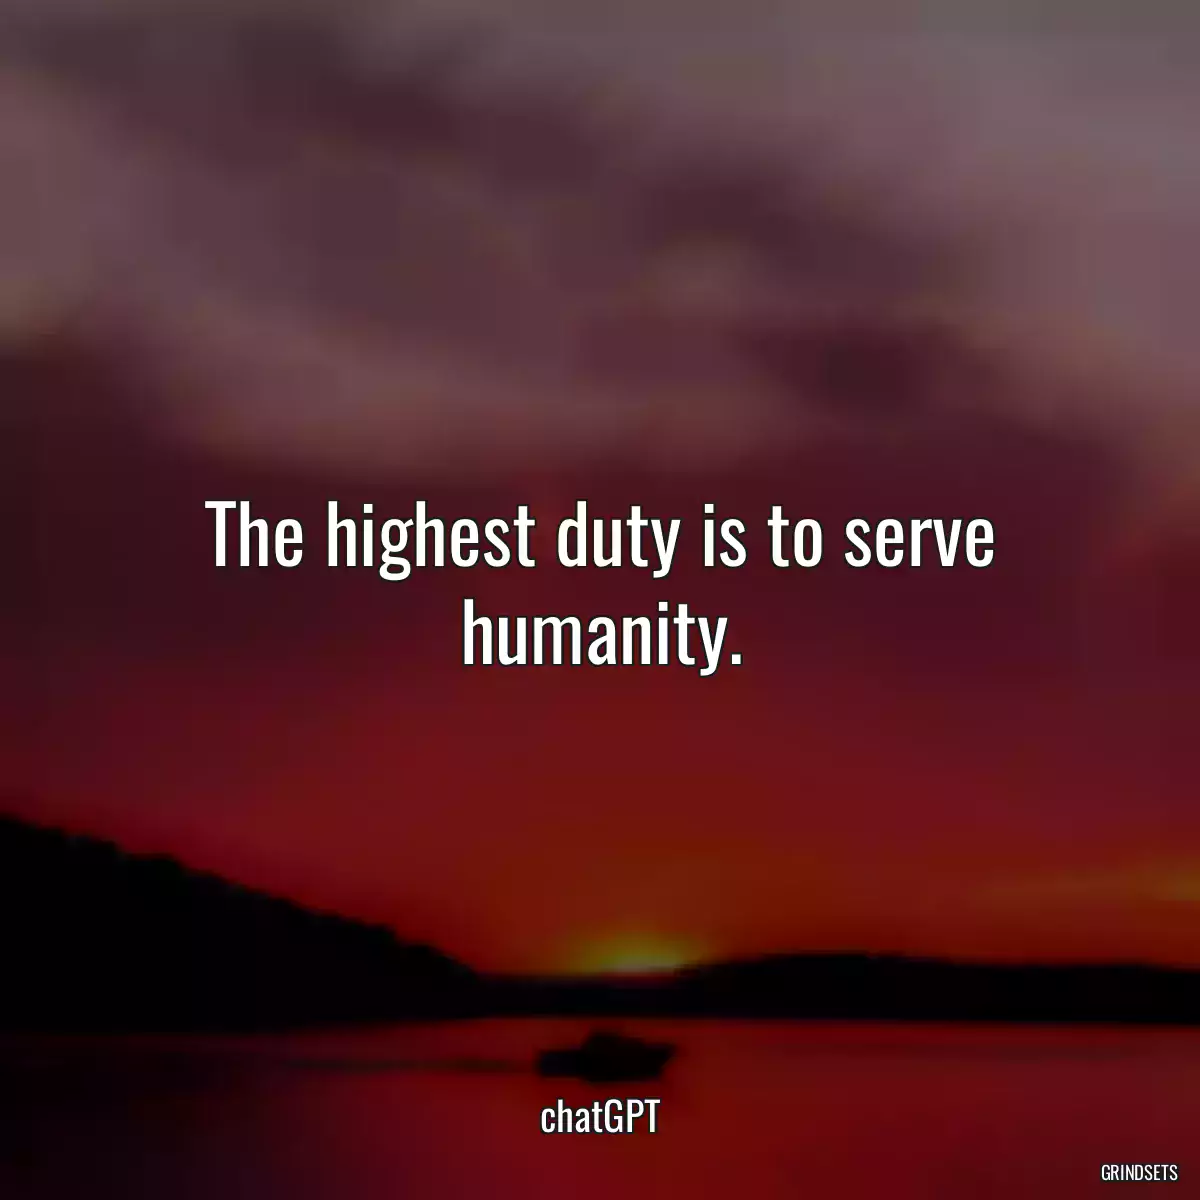 The highest duty is to serve humanity.